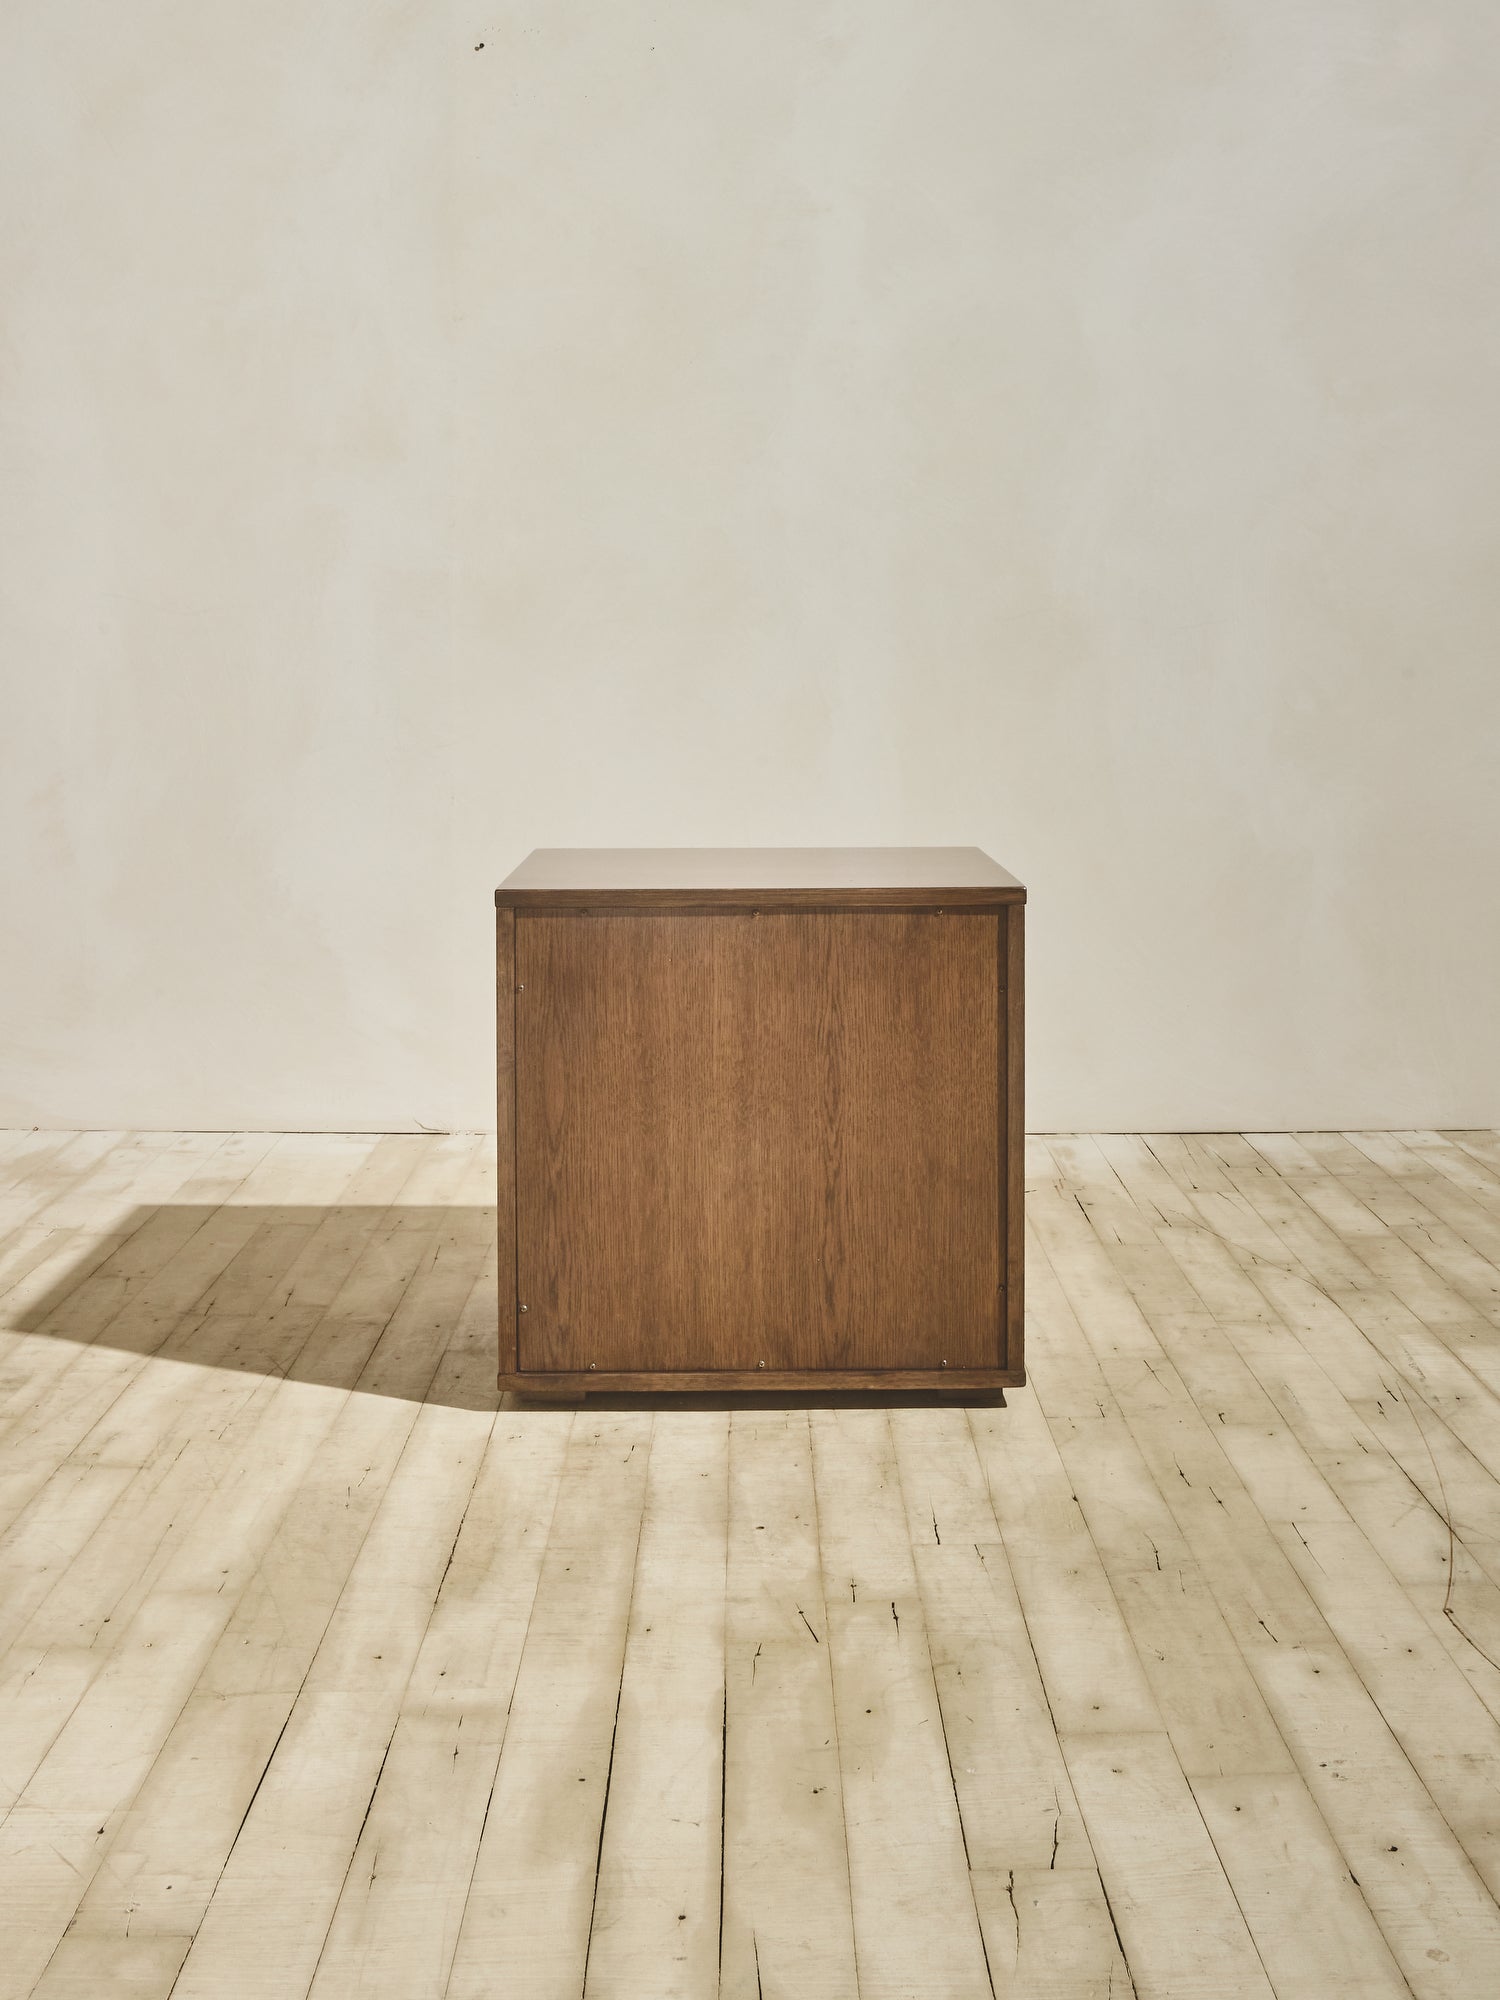 Back view of white oak grain, minimalist Ghent Side Table in natural finish.